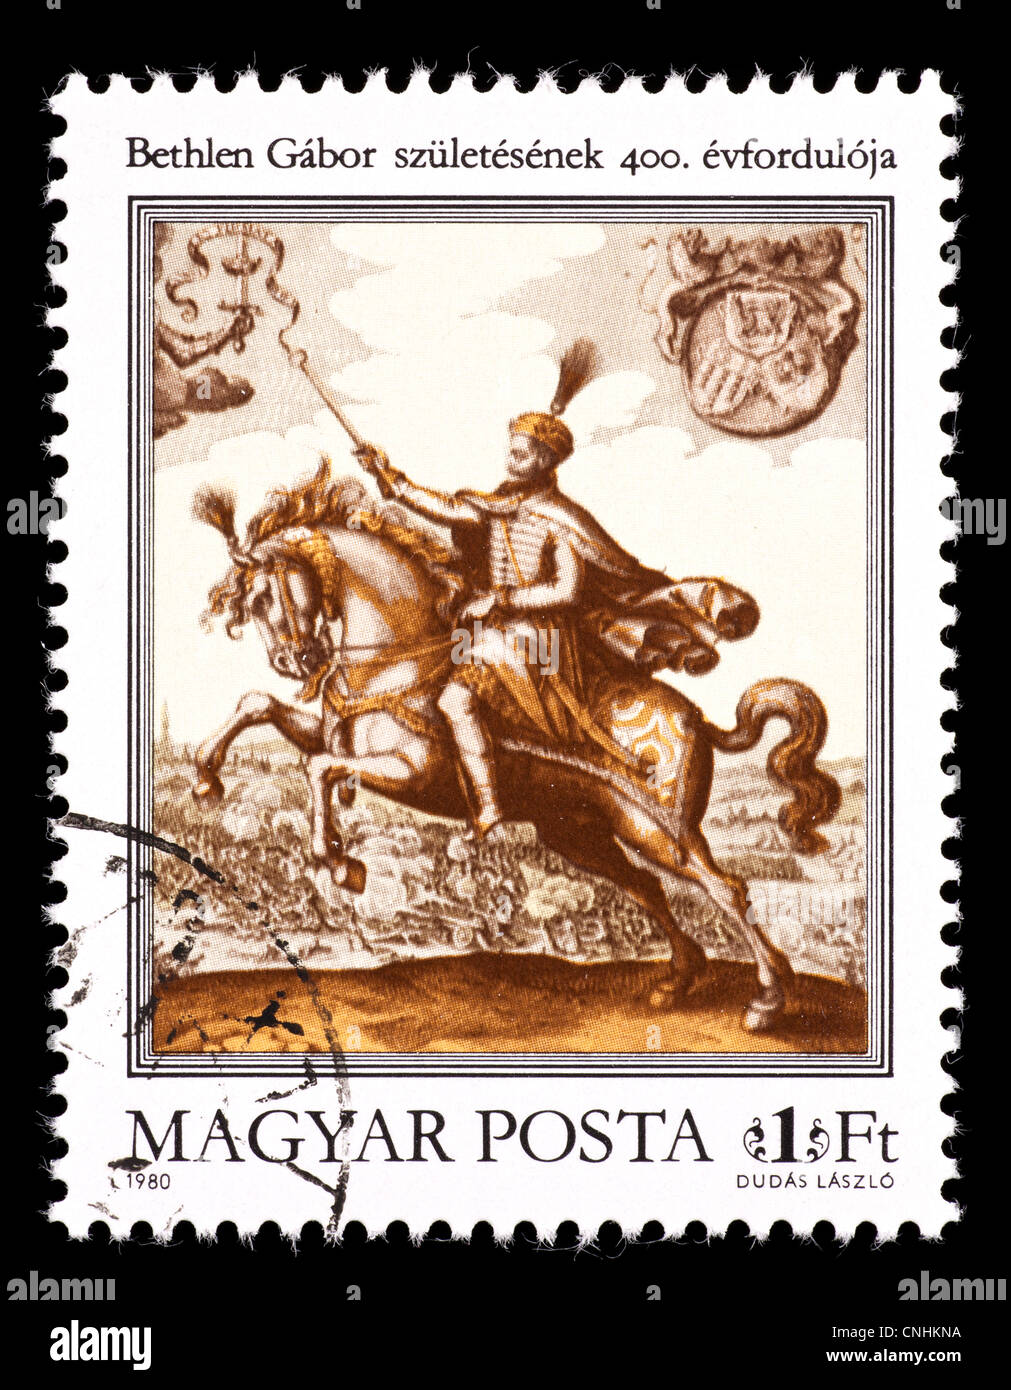 Postage stamp from Hungary depicting Gabor Bethlen, prince of Transylvania and King of Hungary. Stock Photo